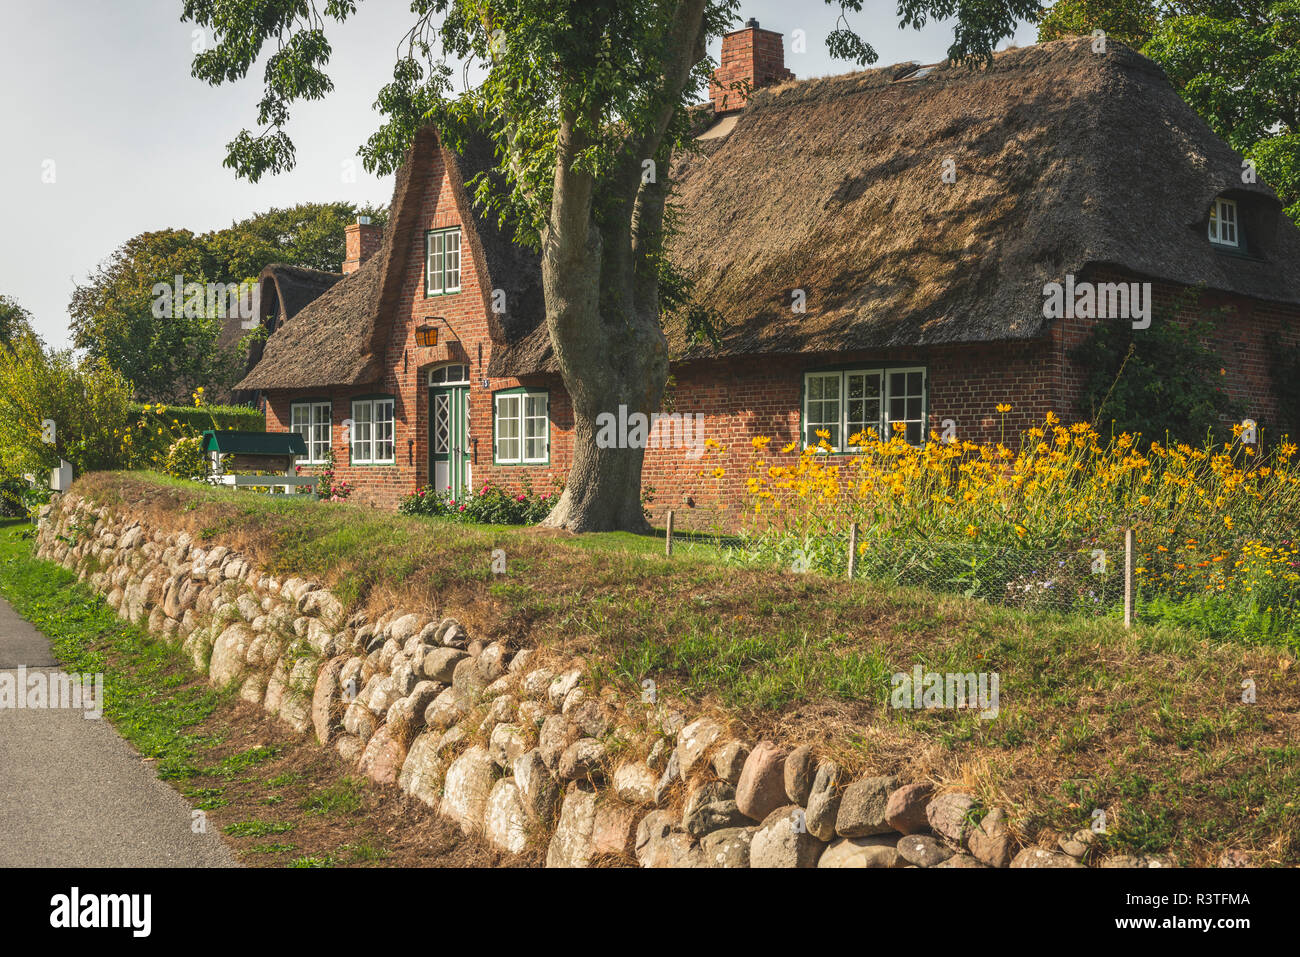 Germany, Schleswig-Holstein, Sylt, Keitum, thatched-roof house Stock Photo